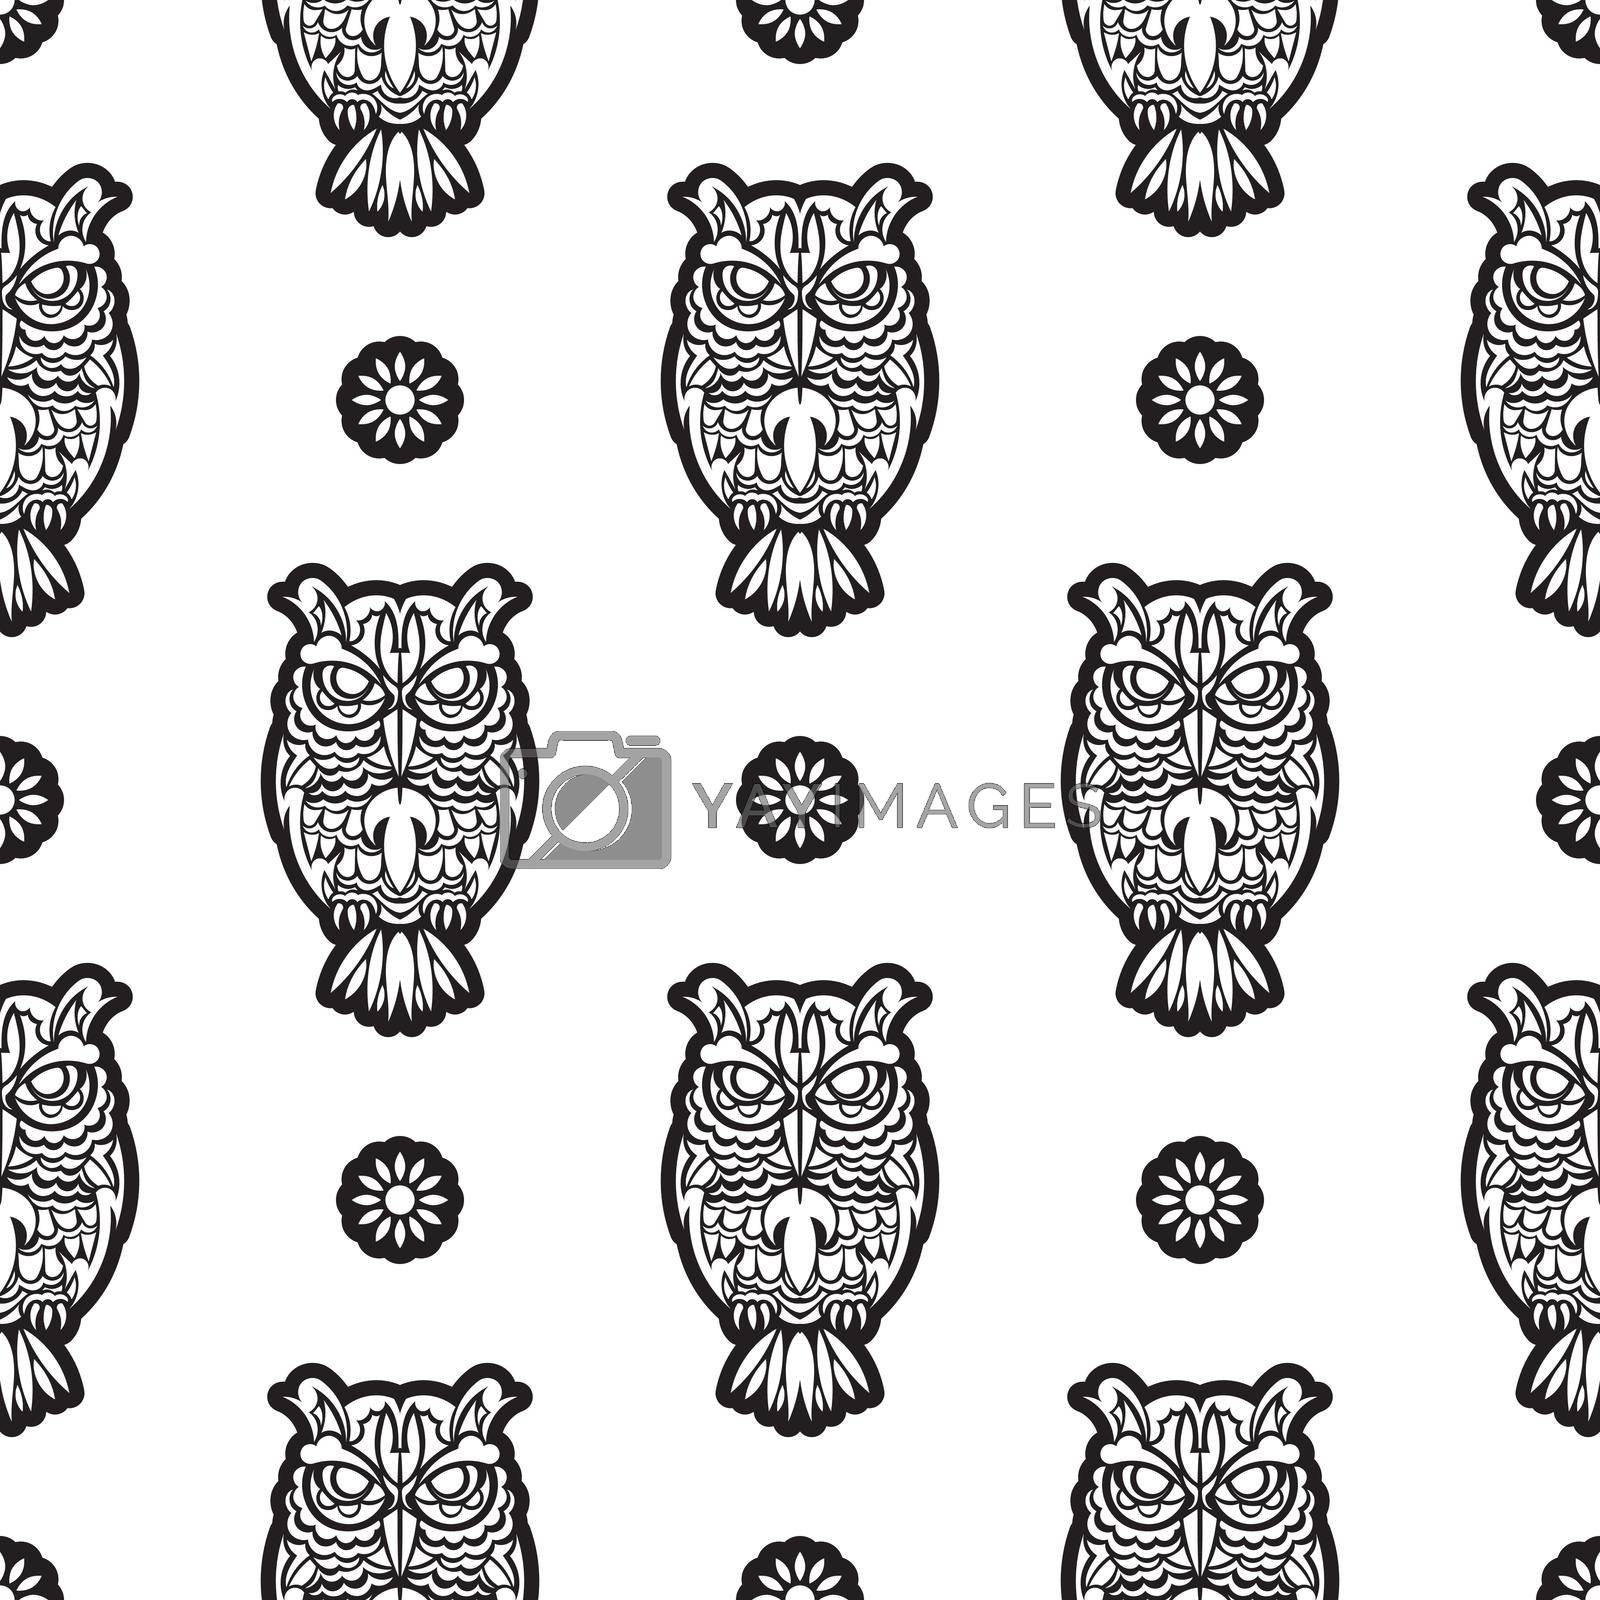 Black-white Seamless pattern of owls in boho style. Good for backgrounds and prints. Vector illustration.